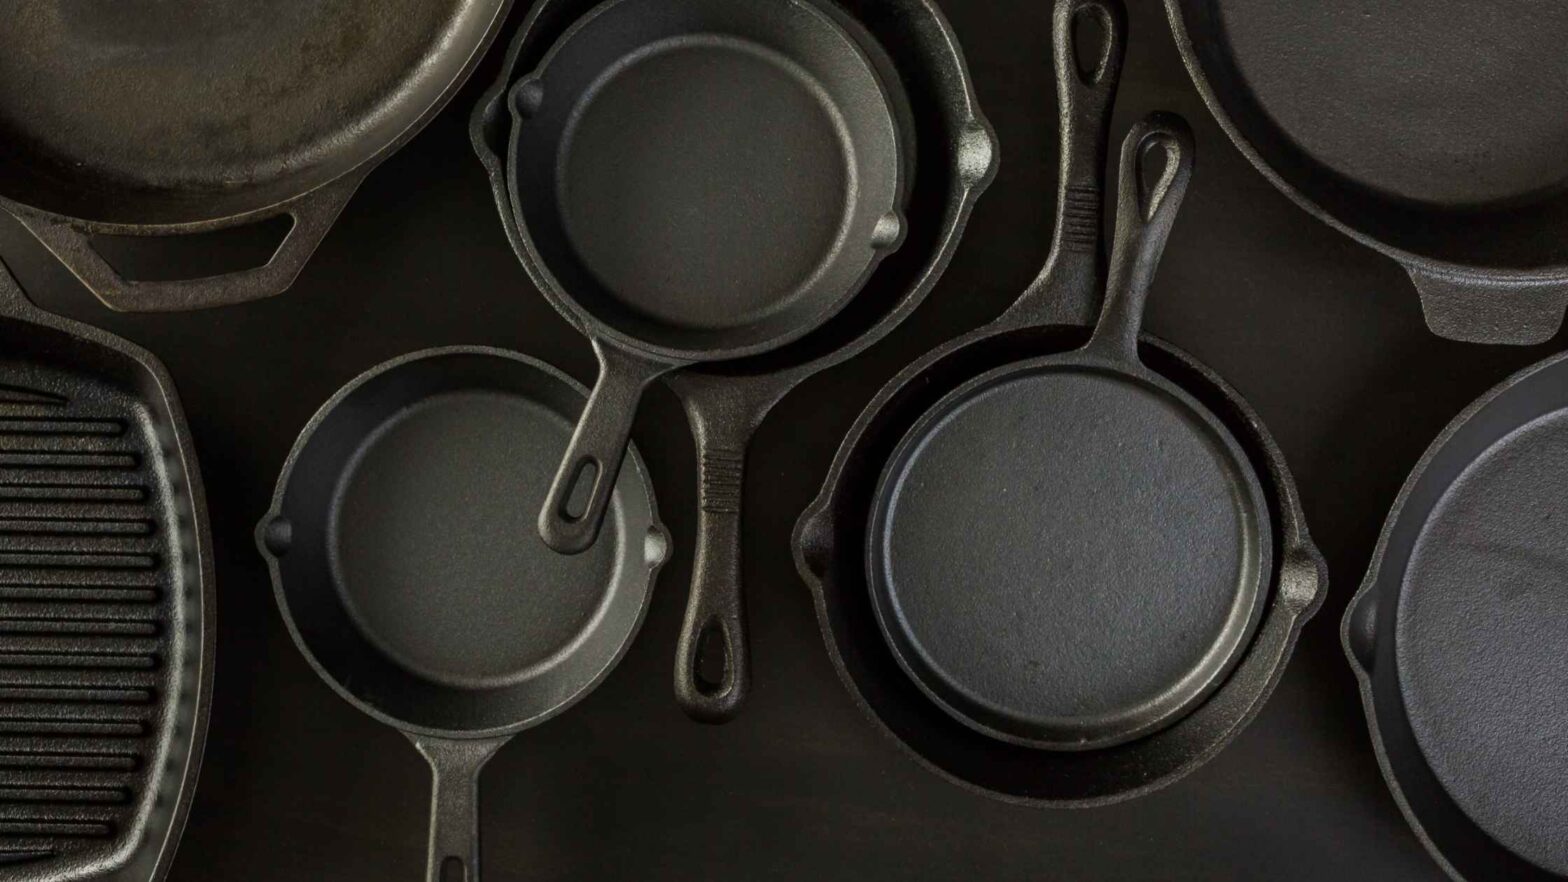 How to Season a Cast Iron Skillet?